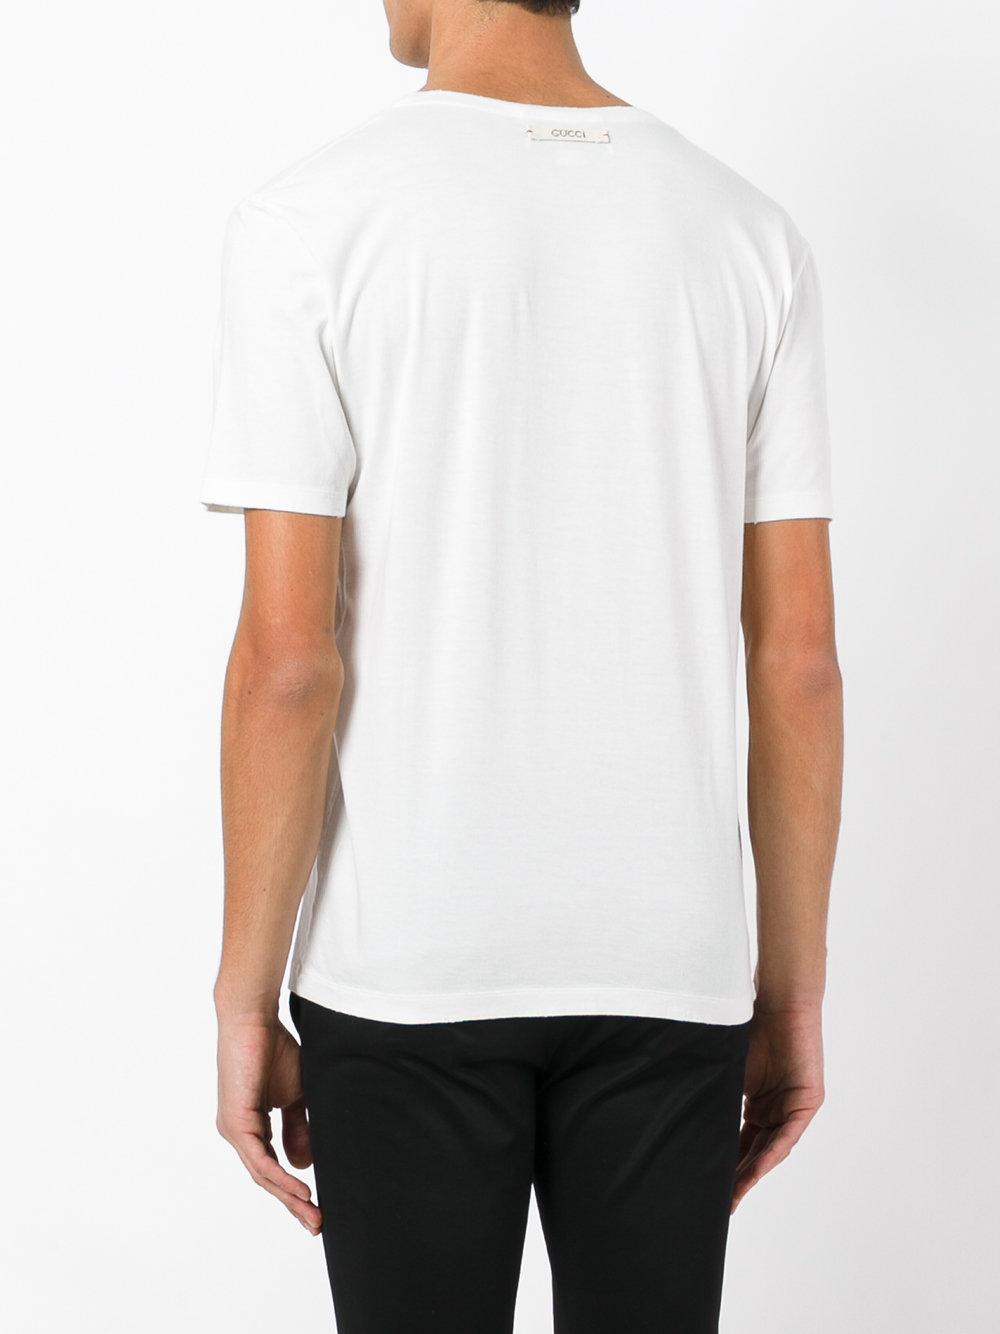 Gucci Classic T-shirt in White for Men | Lyst